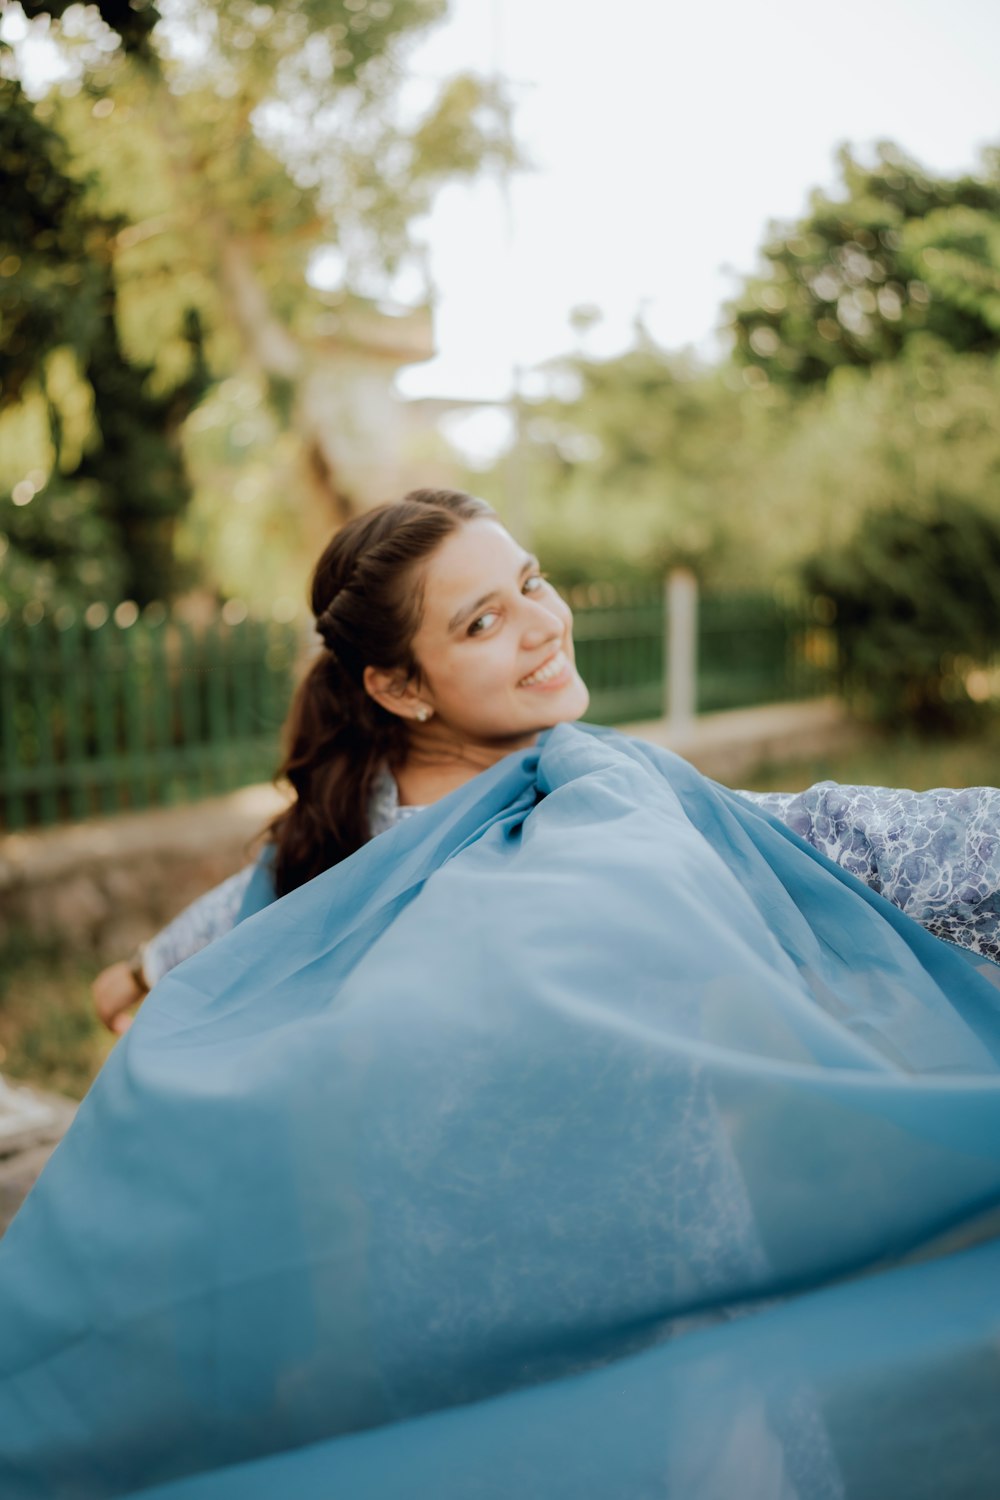 a woman wrapped in a blue blanket in a park